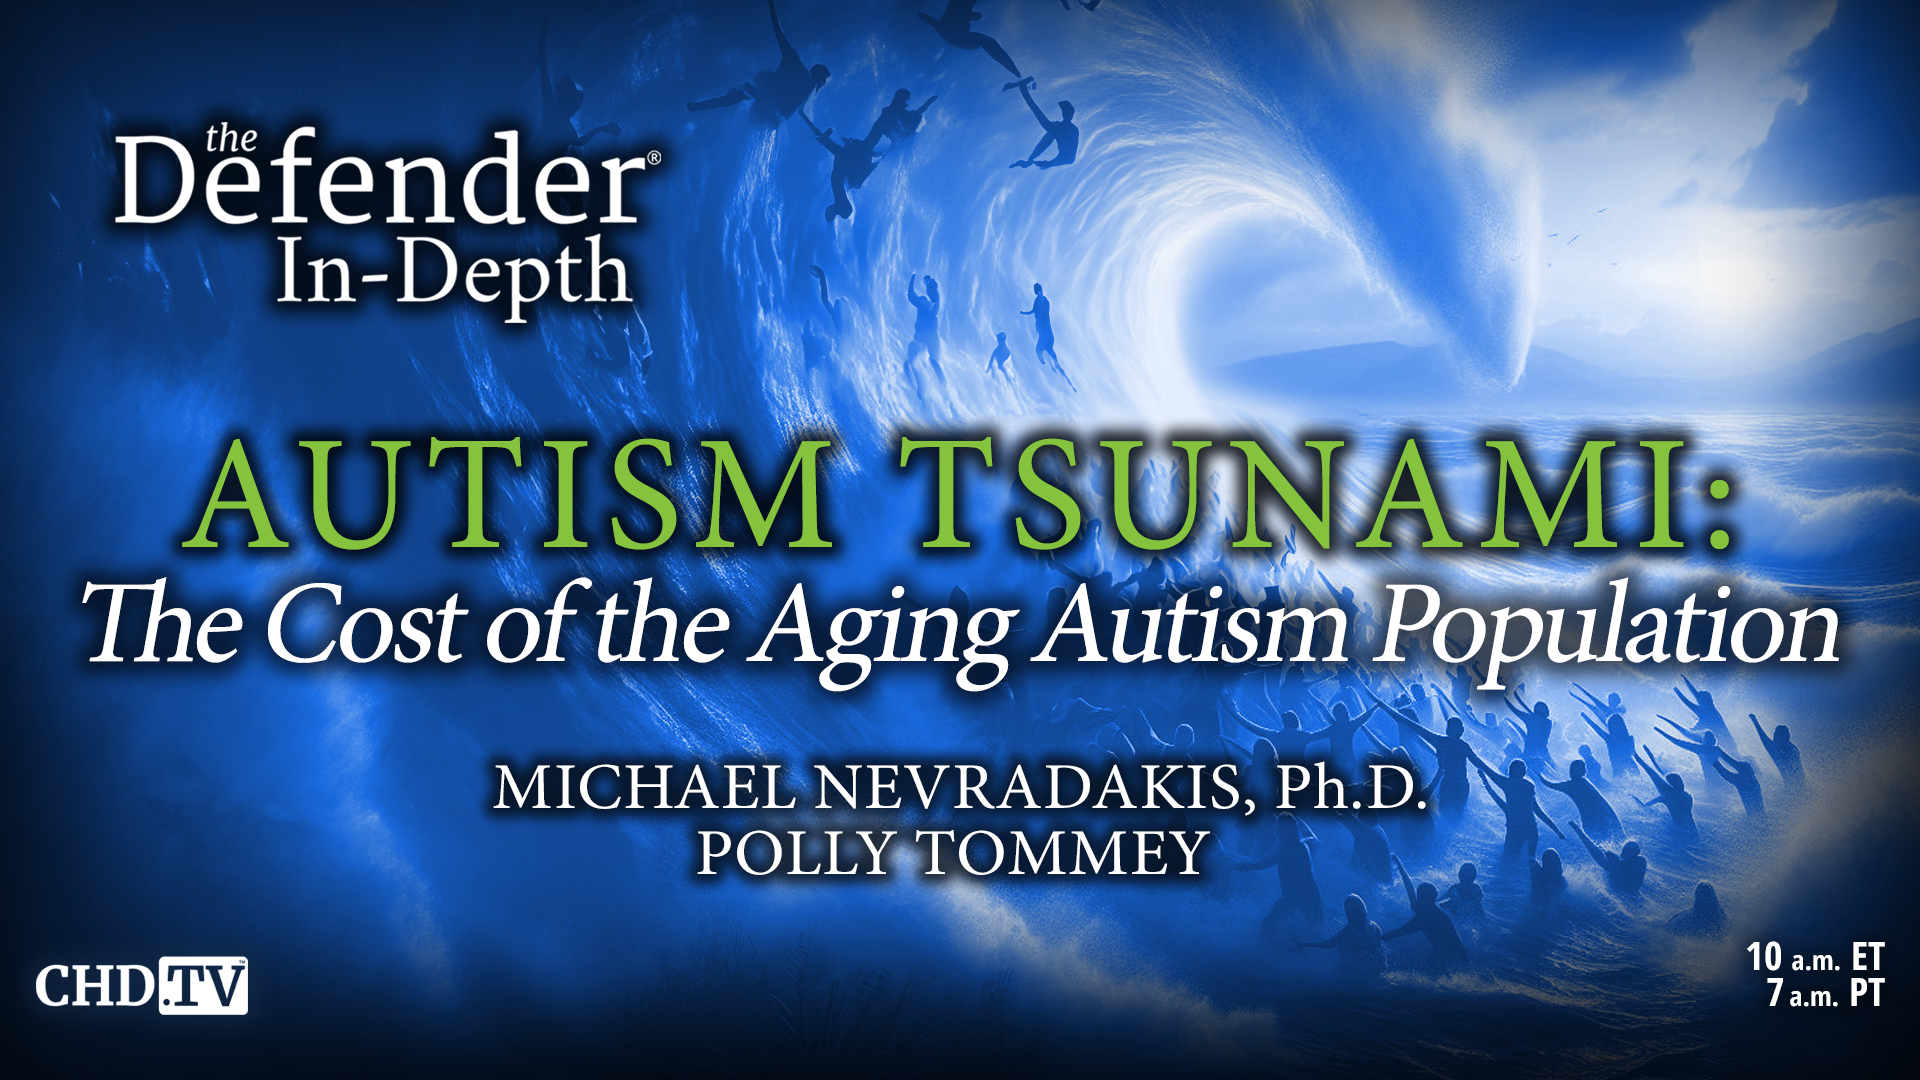 Autism Tsunami: The Cost of the Aging Autism Population